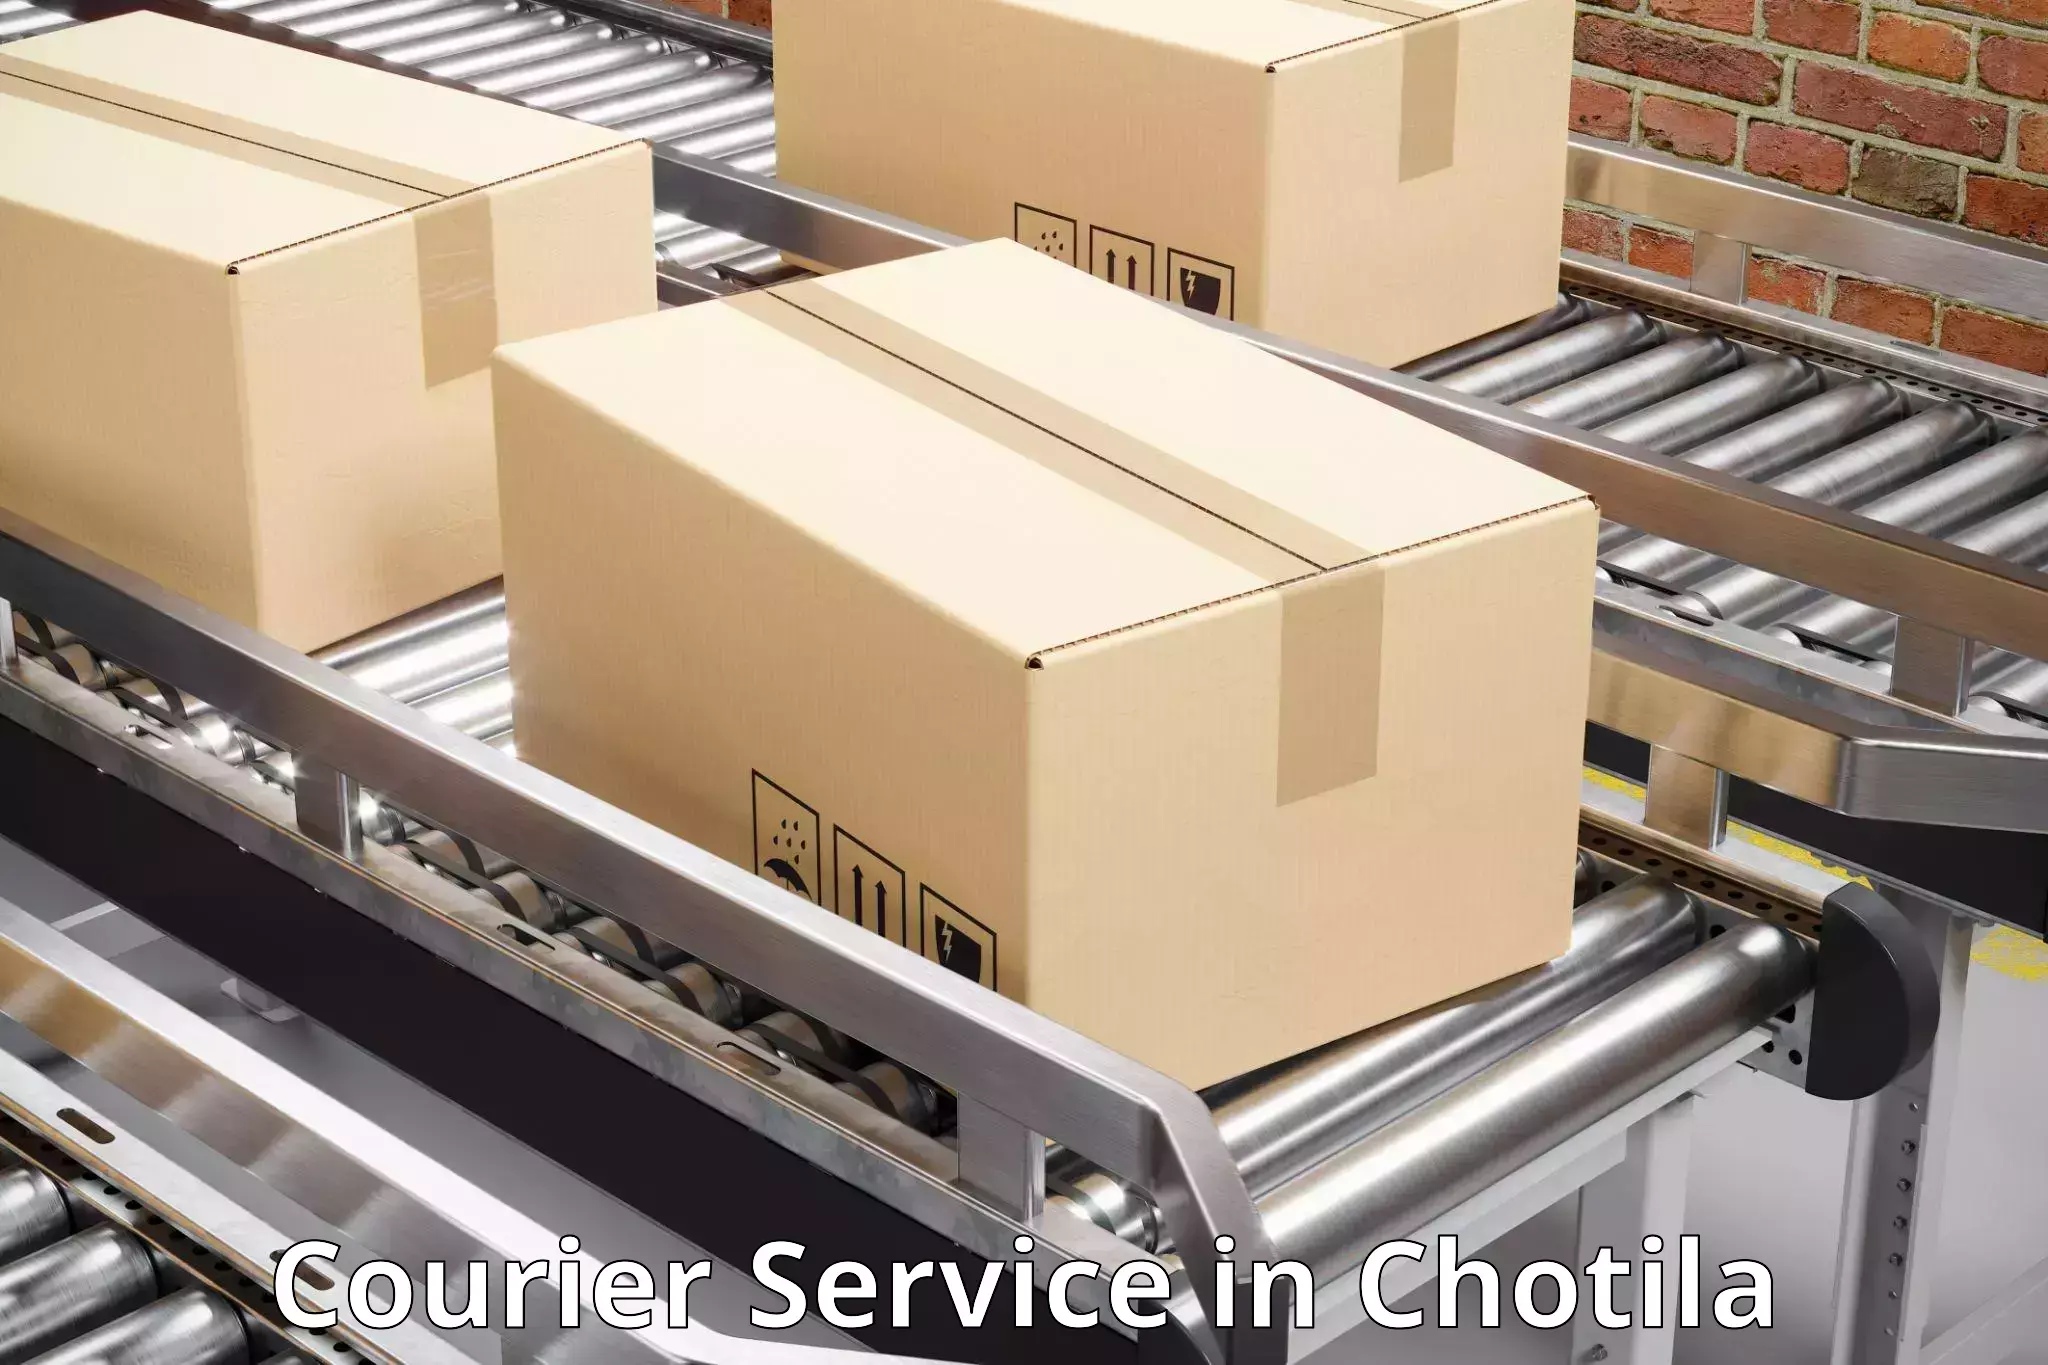 User-friendly delivery service in Chotila